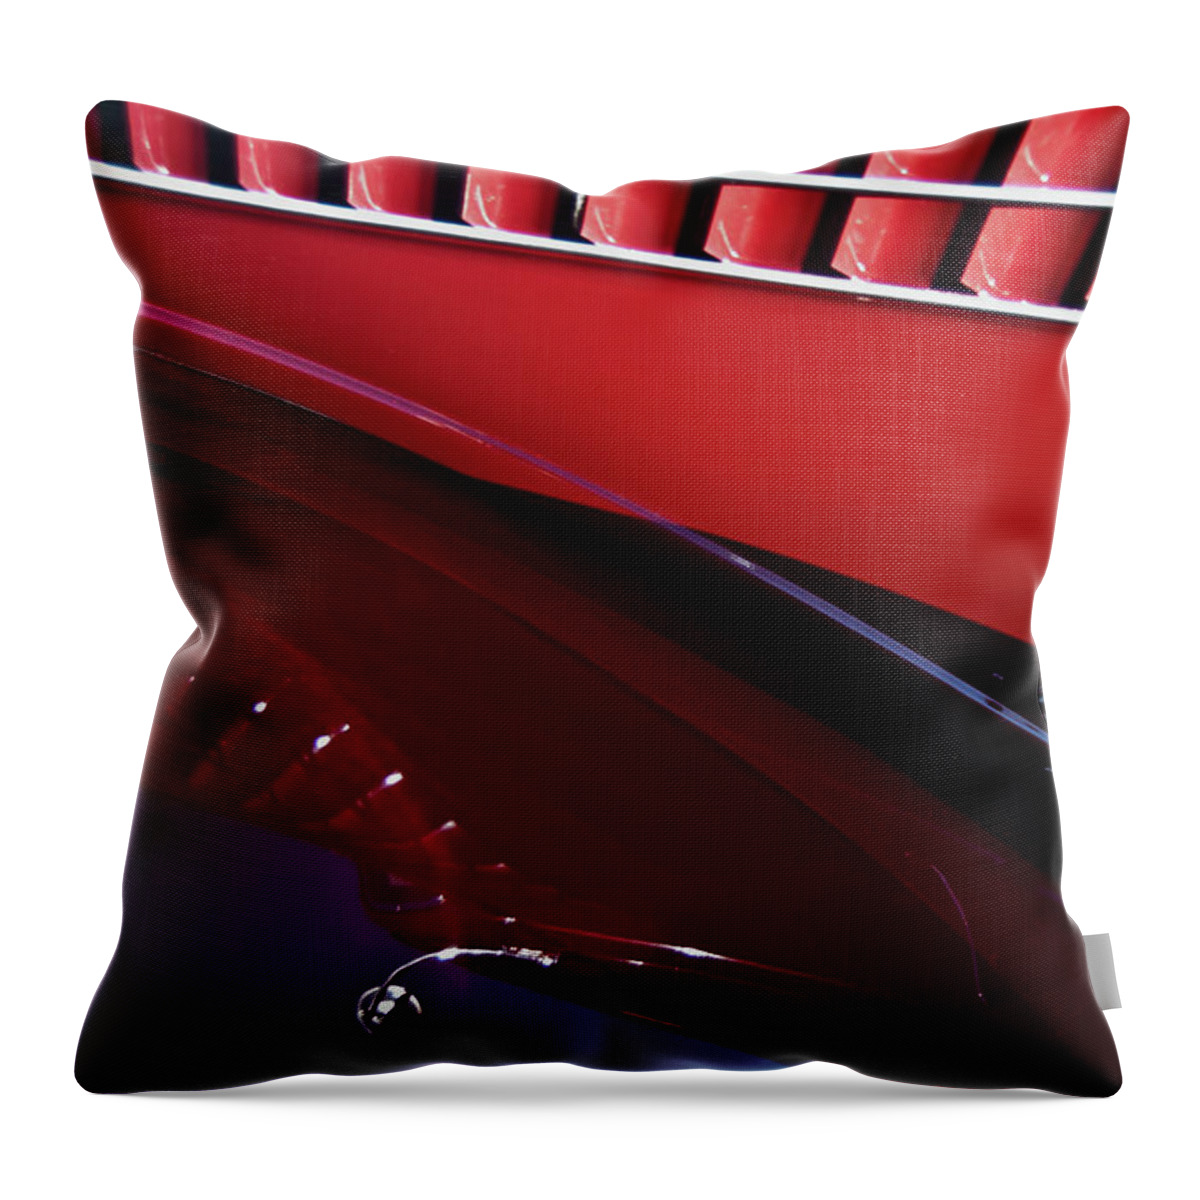 Red Throw Pillow featuring the photograph 1935 Ford V8 Hotrod by Jani Freimann